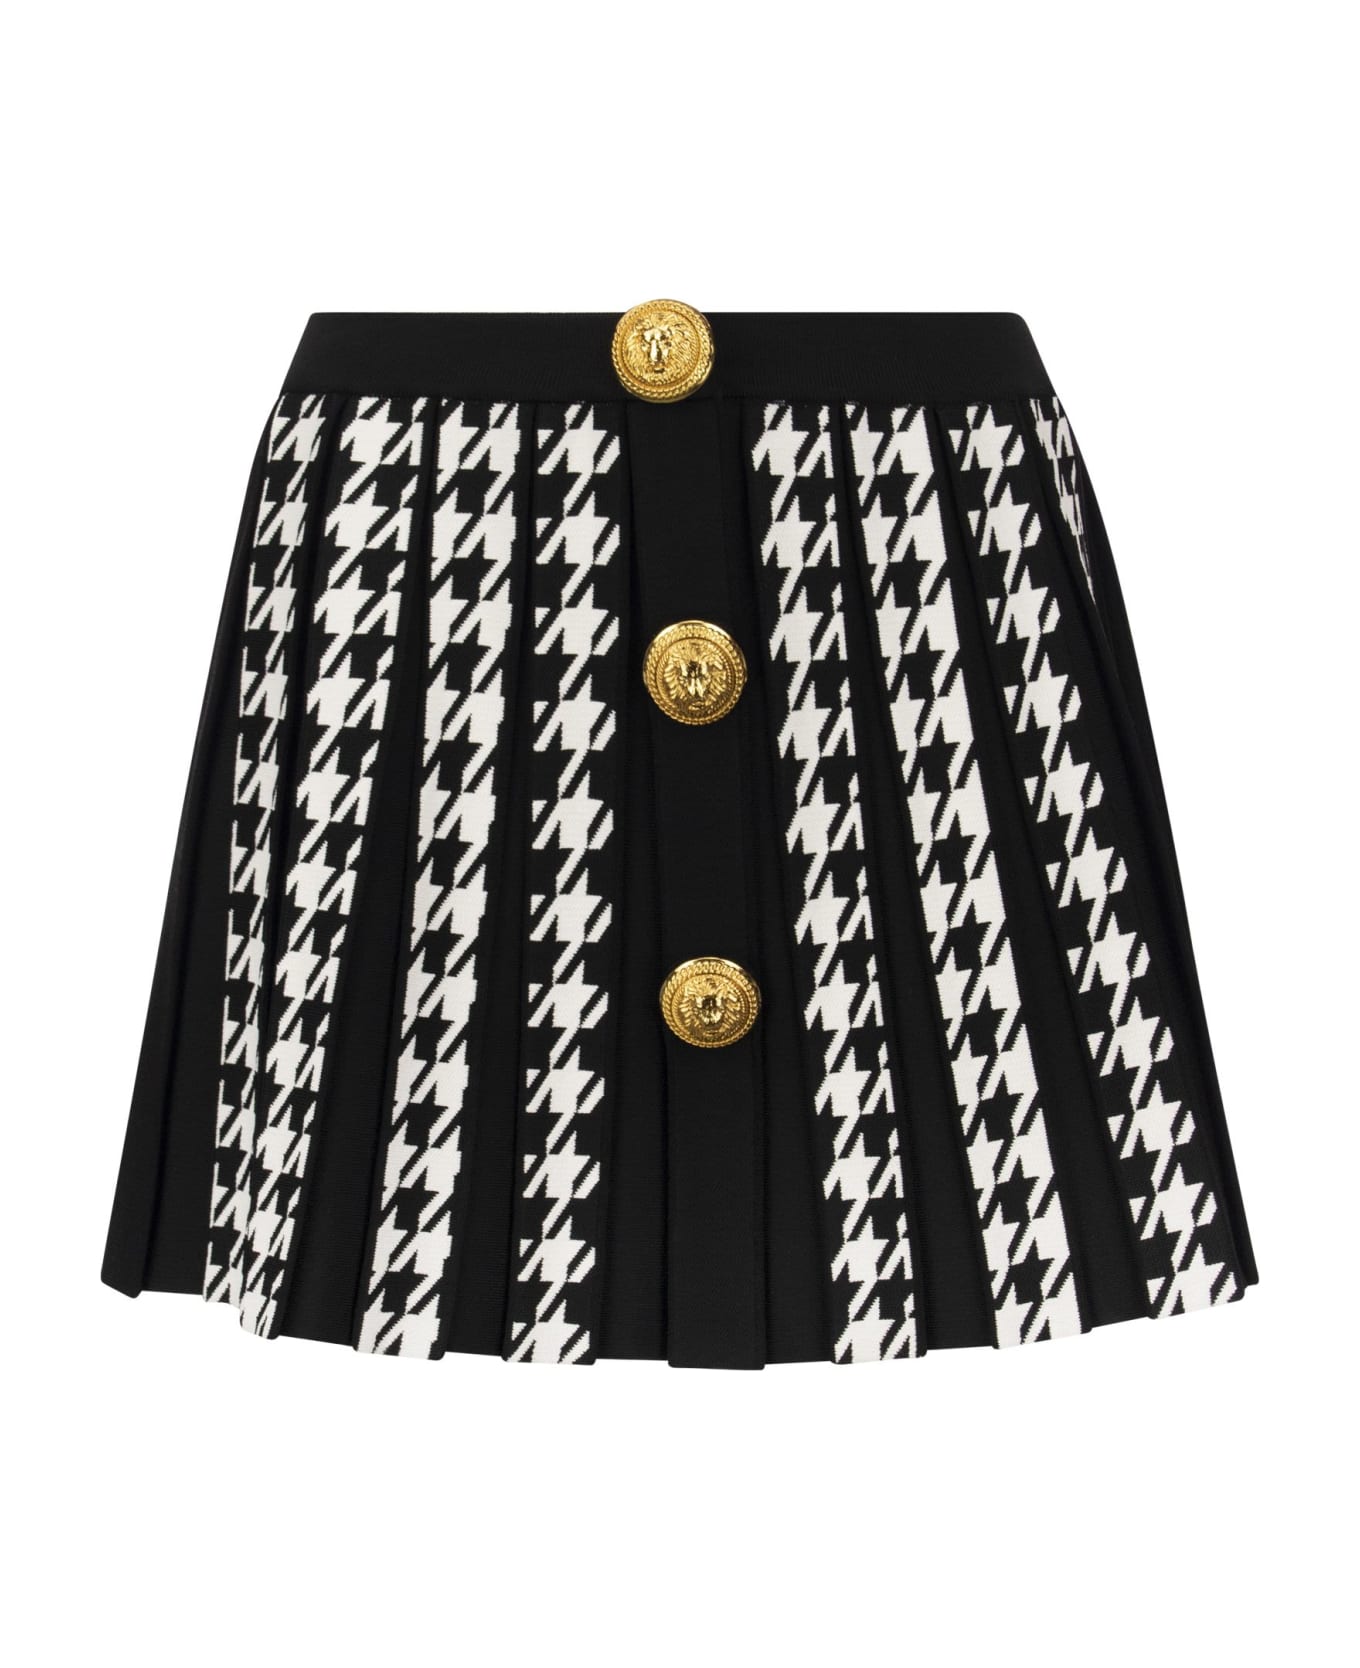 Balmain Pleated Miniskirt With Buttons - Black/white